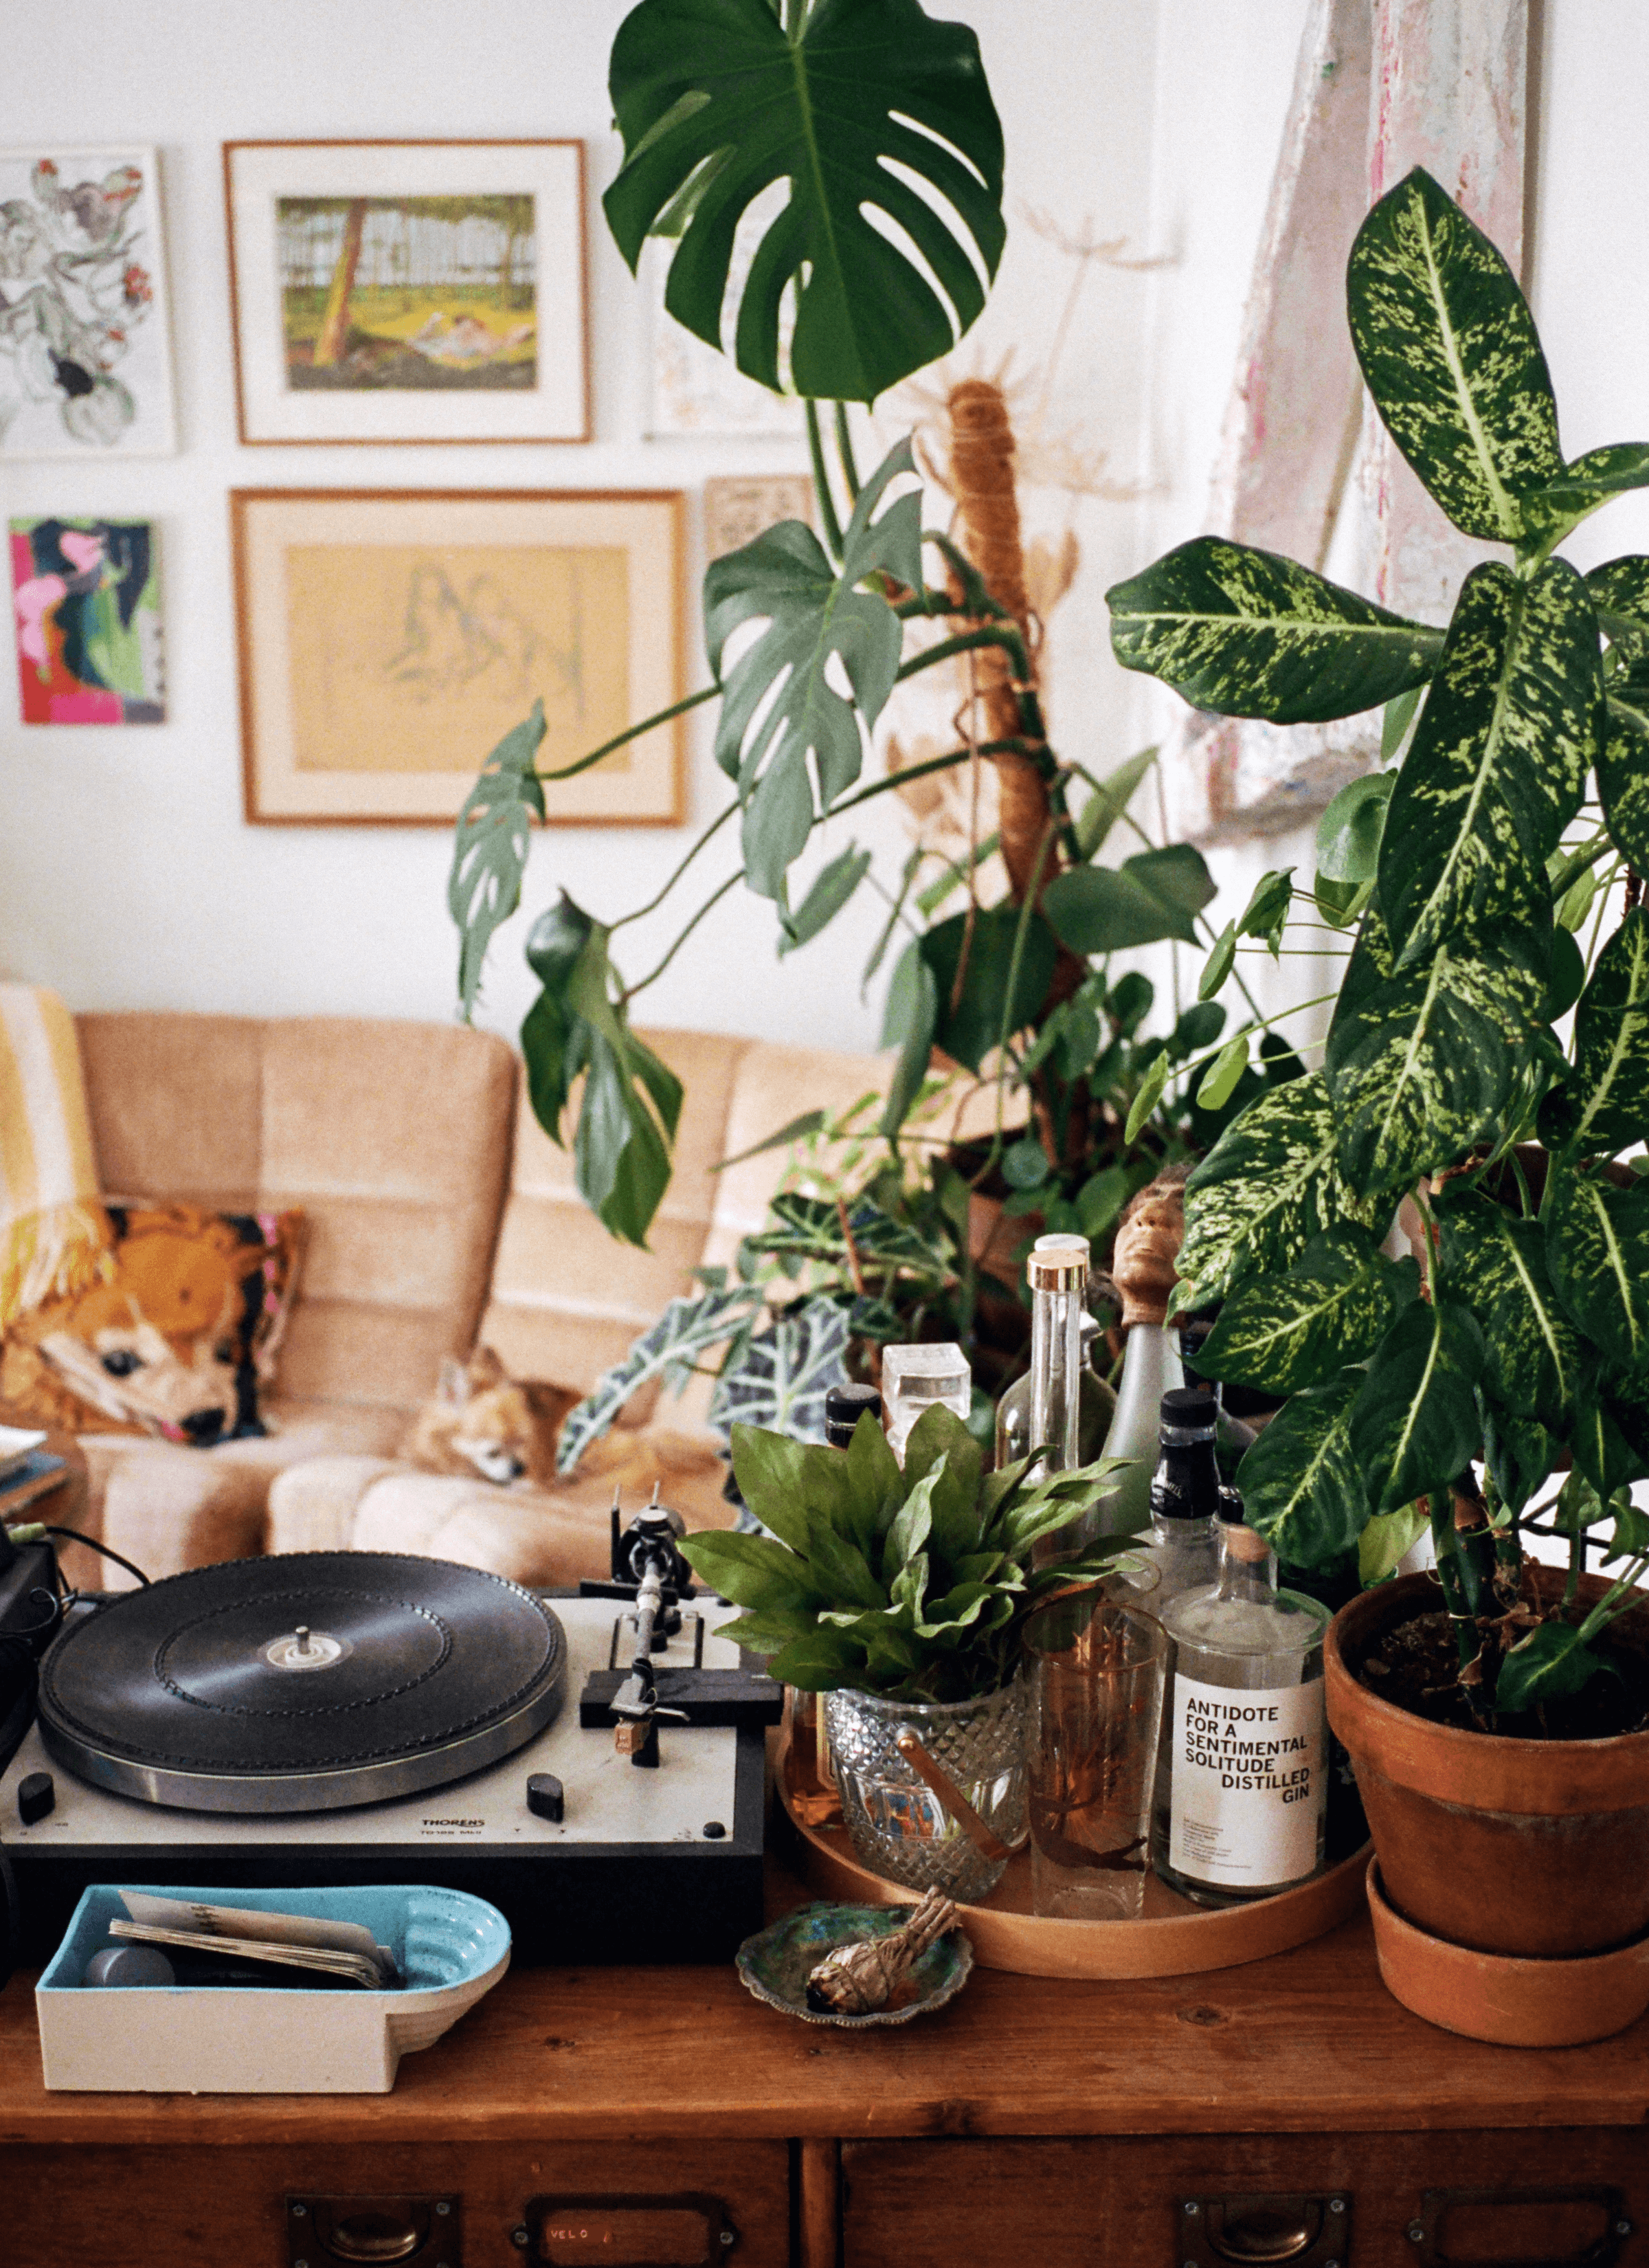 A big pot of Dumb cane next to a small pot of basils next to a phonograph on the table. Behind it, a small dog is sitting on the sofa and there are a couple of paintings hung on the wall.